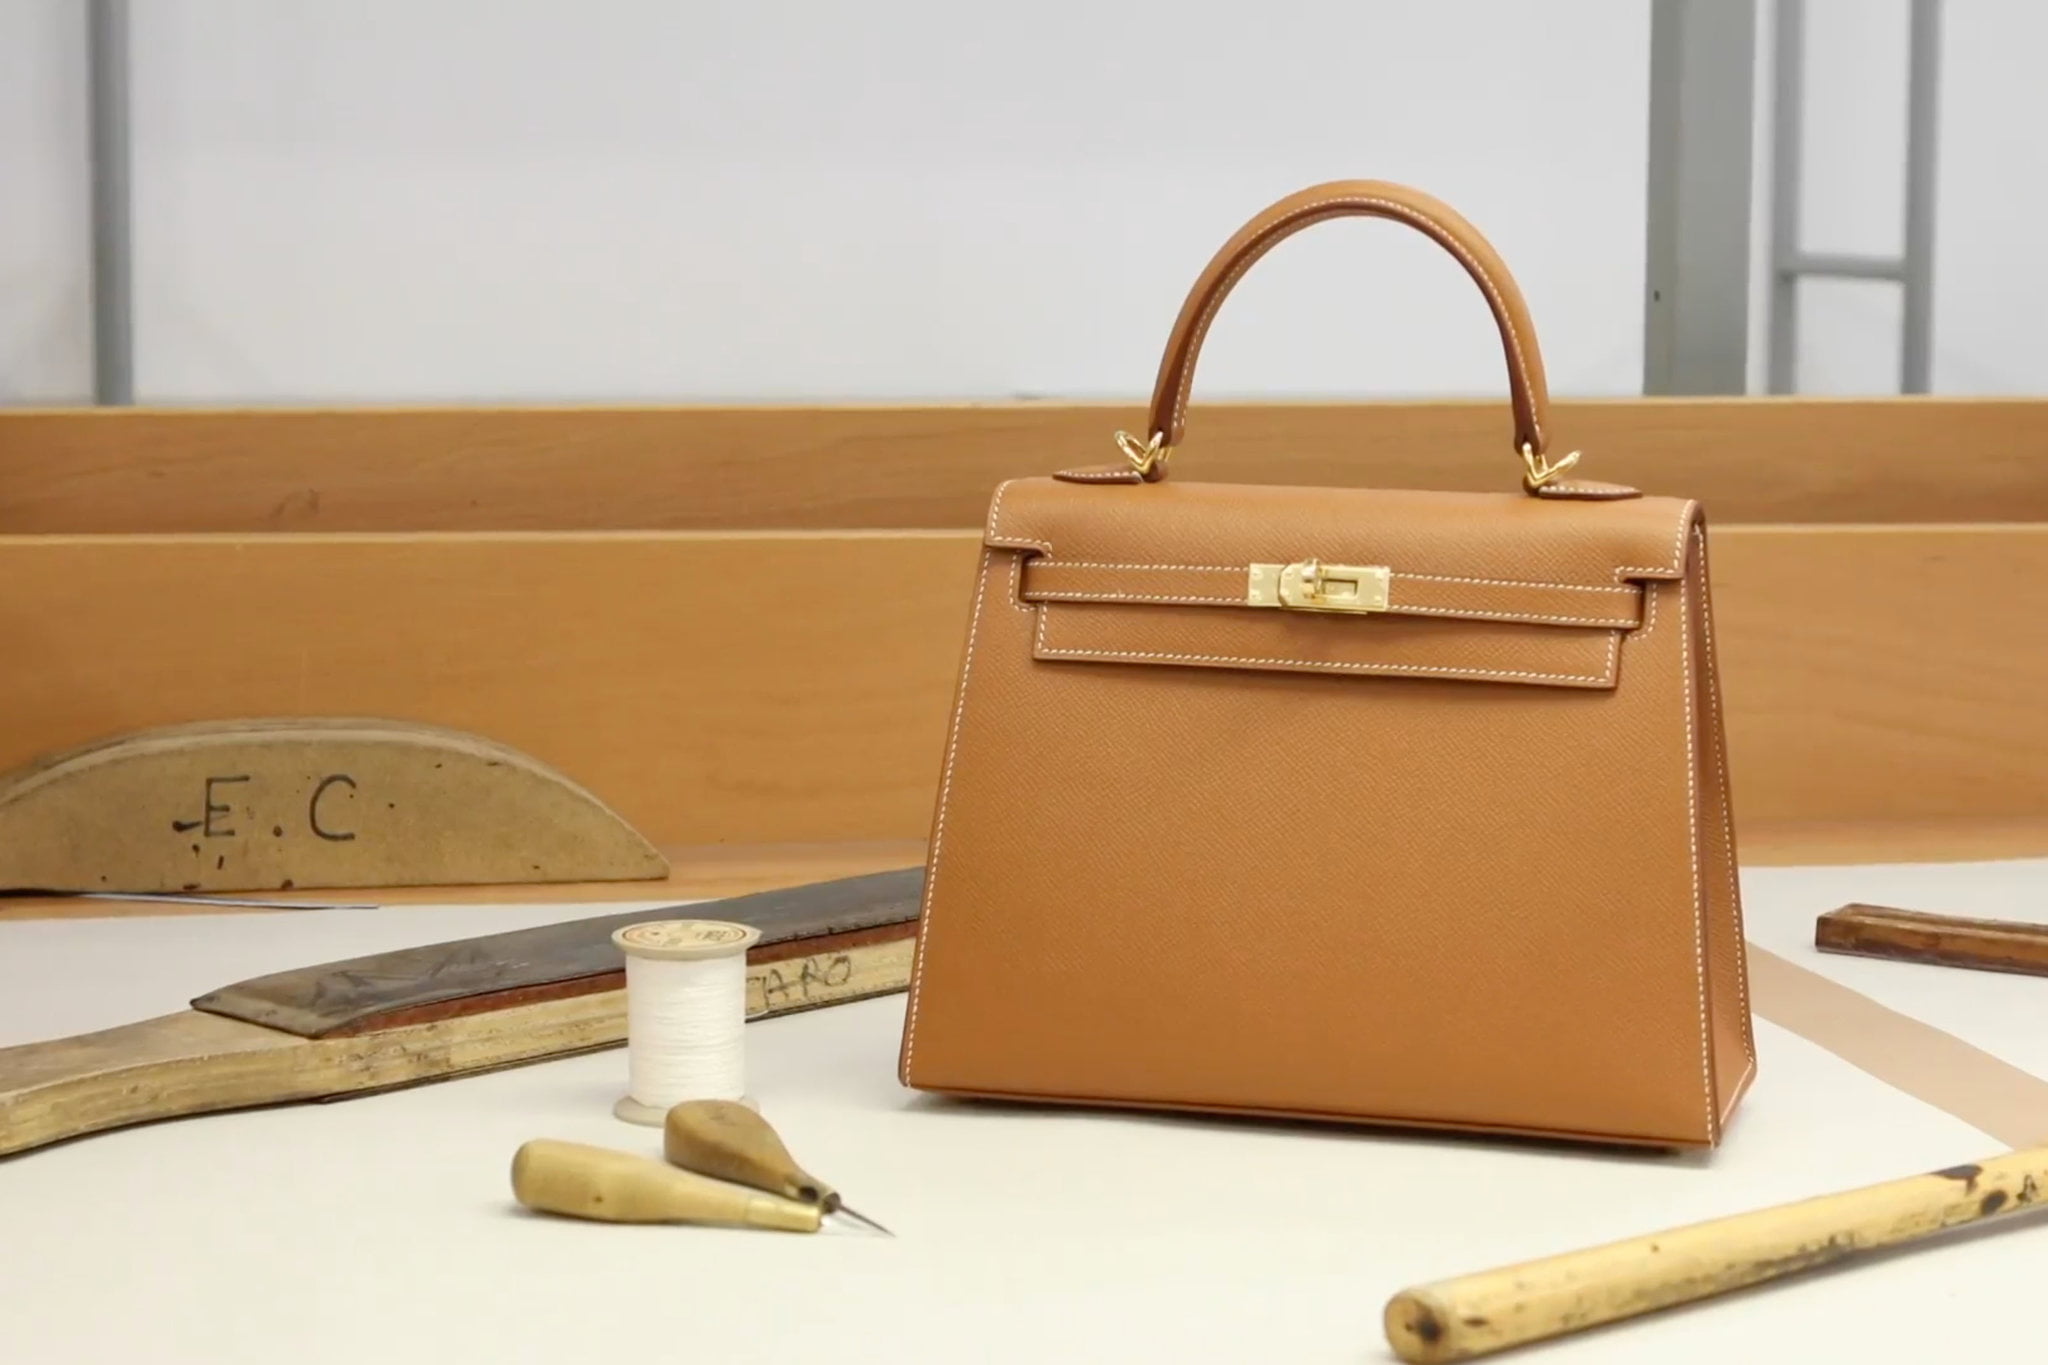 Hermès Unveils Plans to Open New Leather Production Facility in France